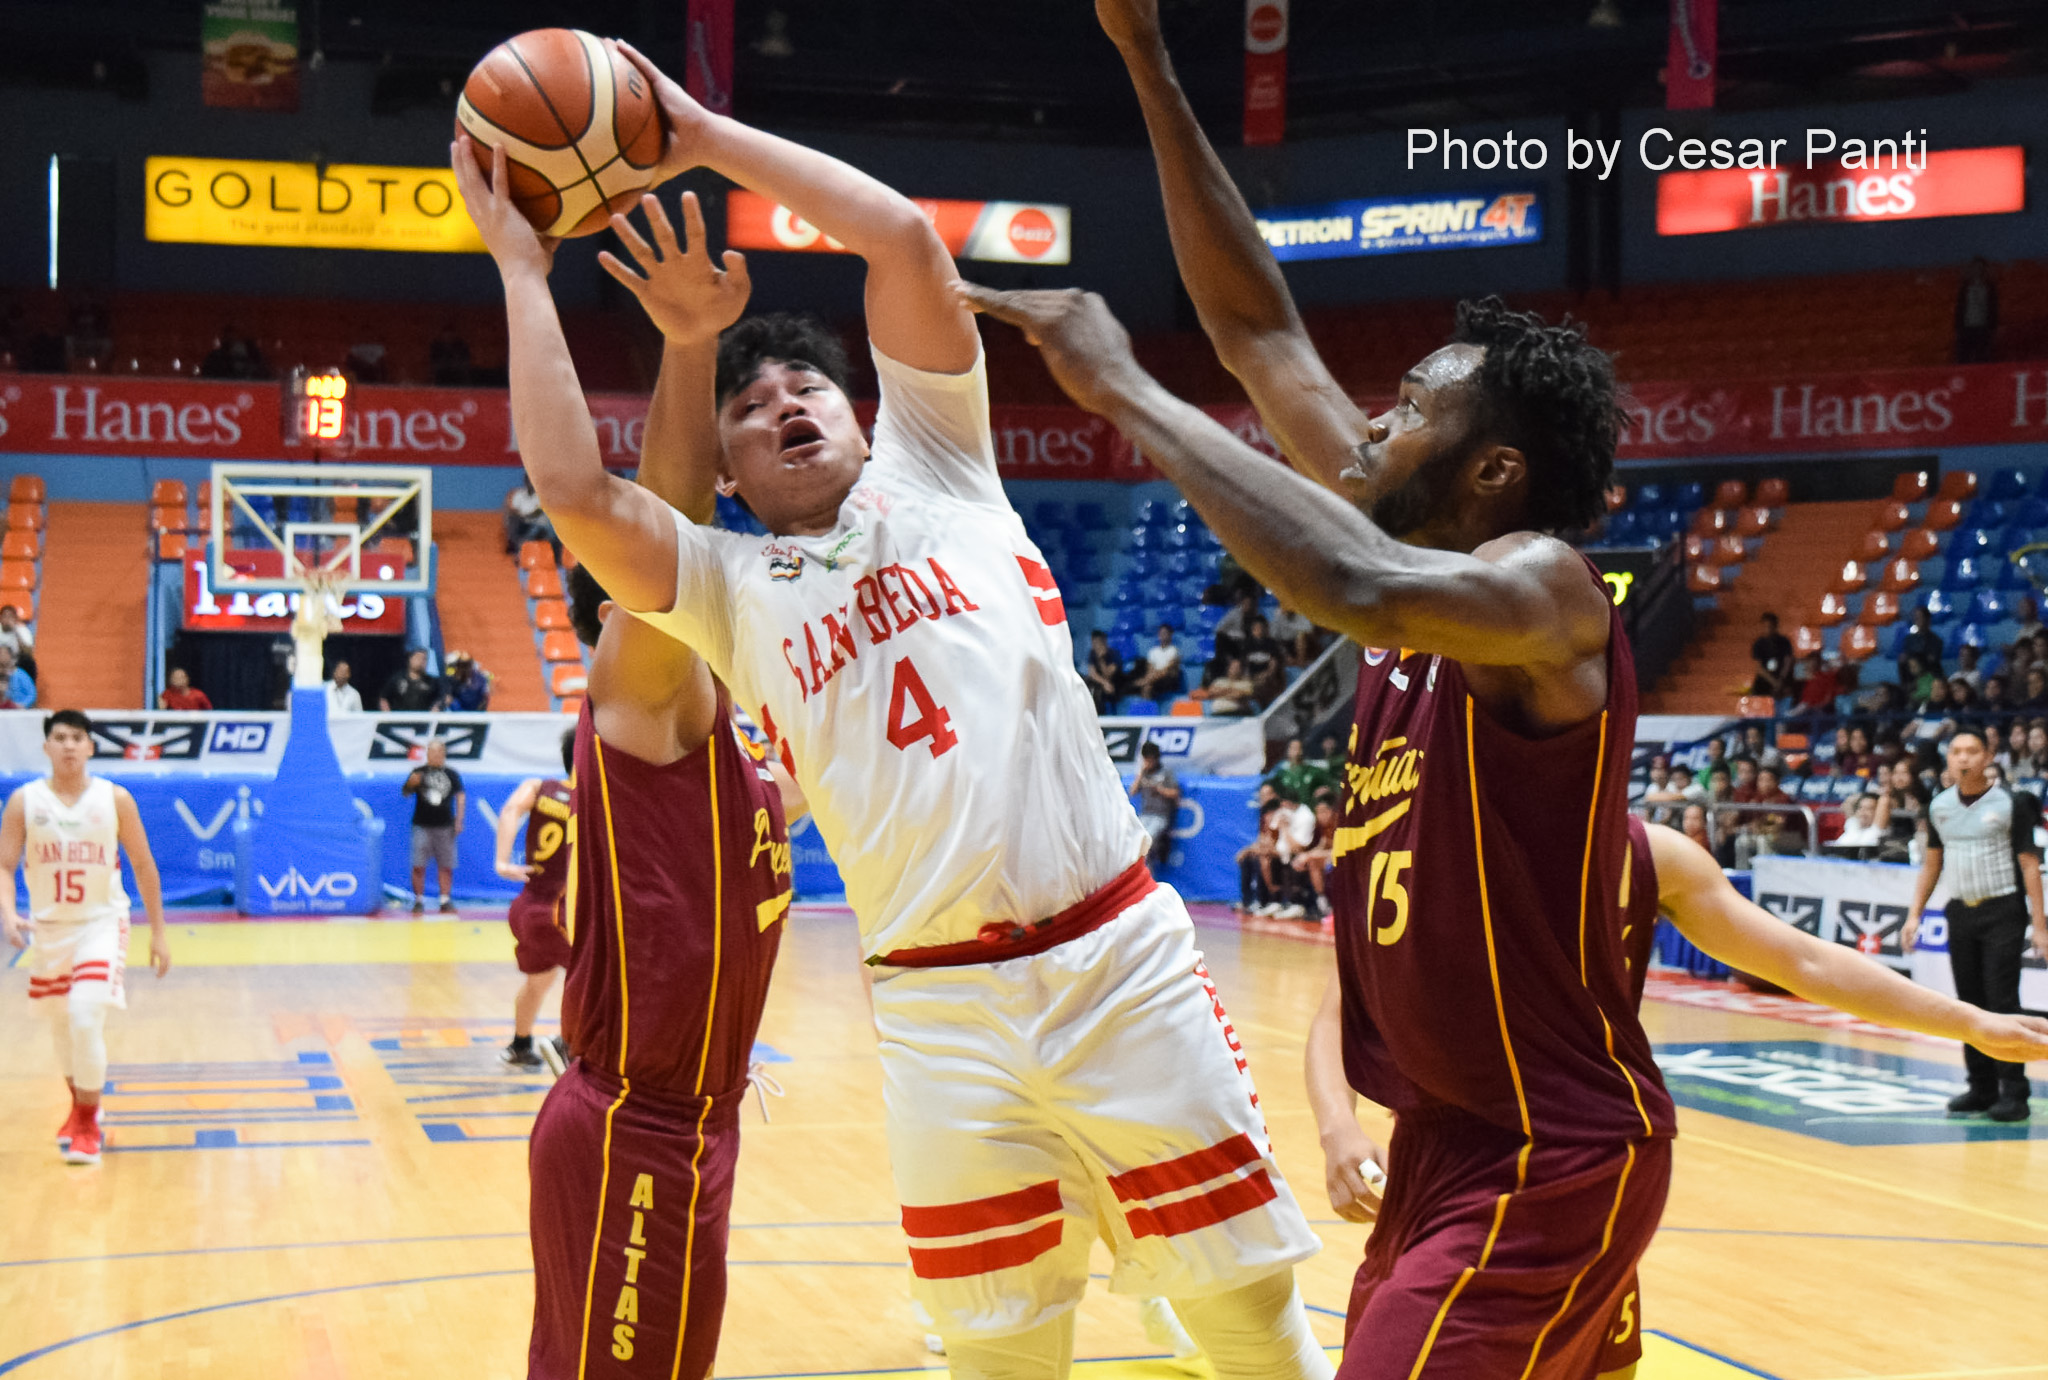 San Beda sets up another finals date with Lyceum